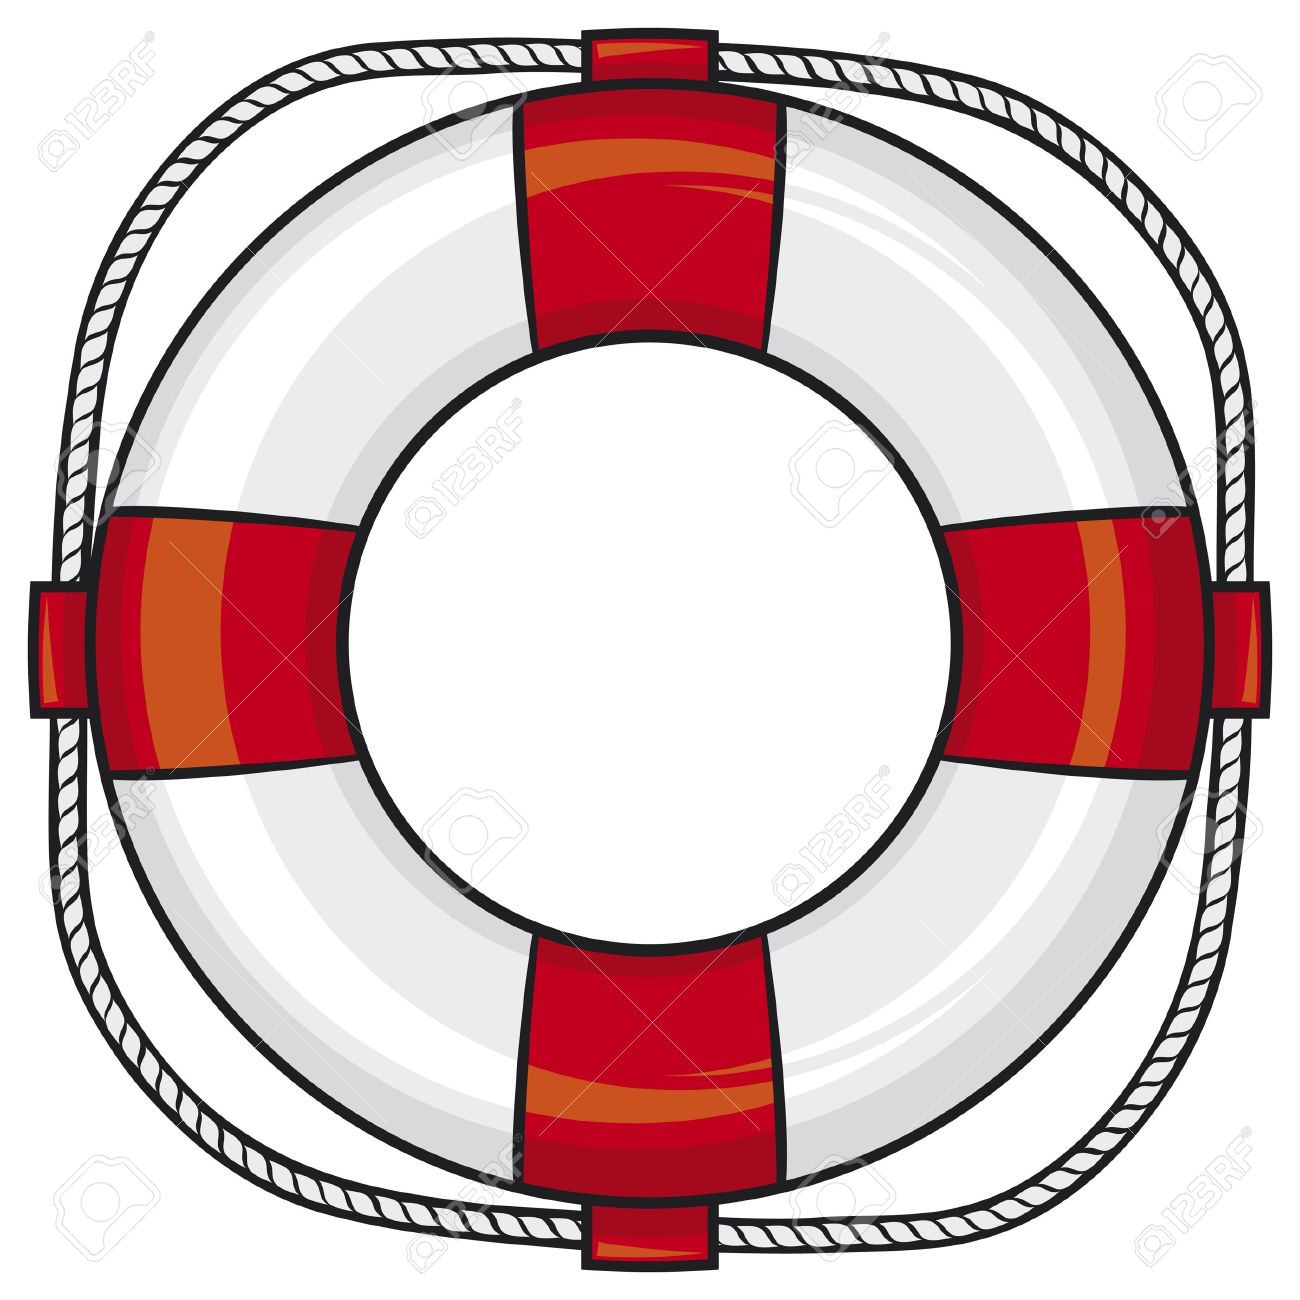 Pool float free download. Lifeguard clipart floaty